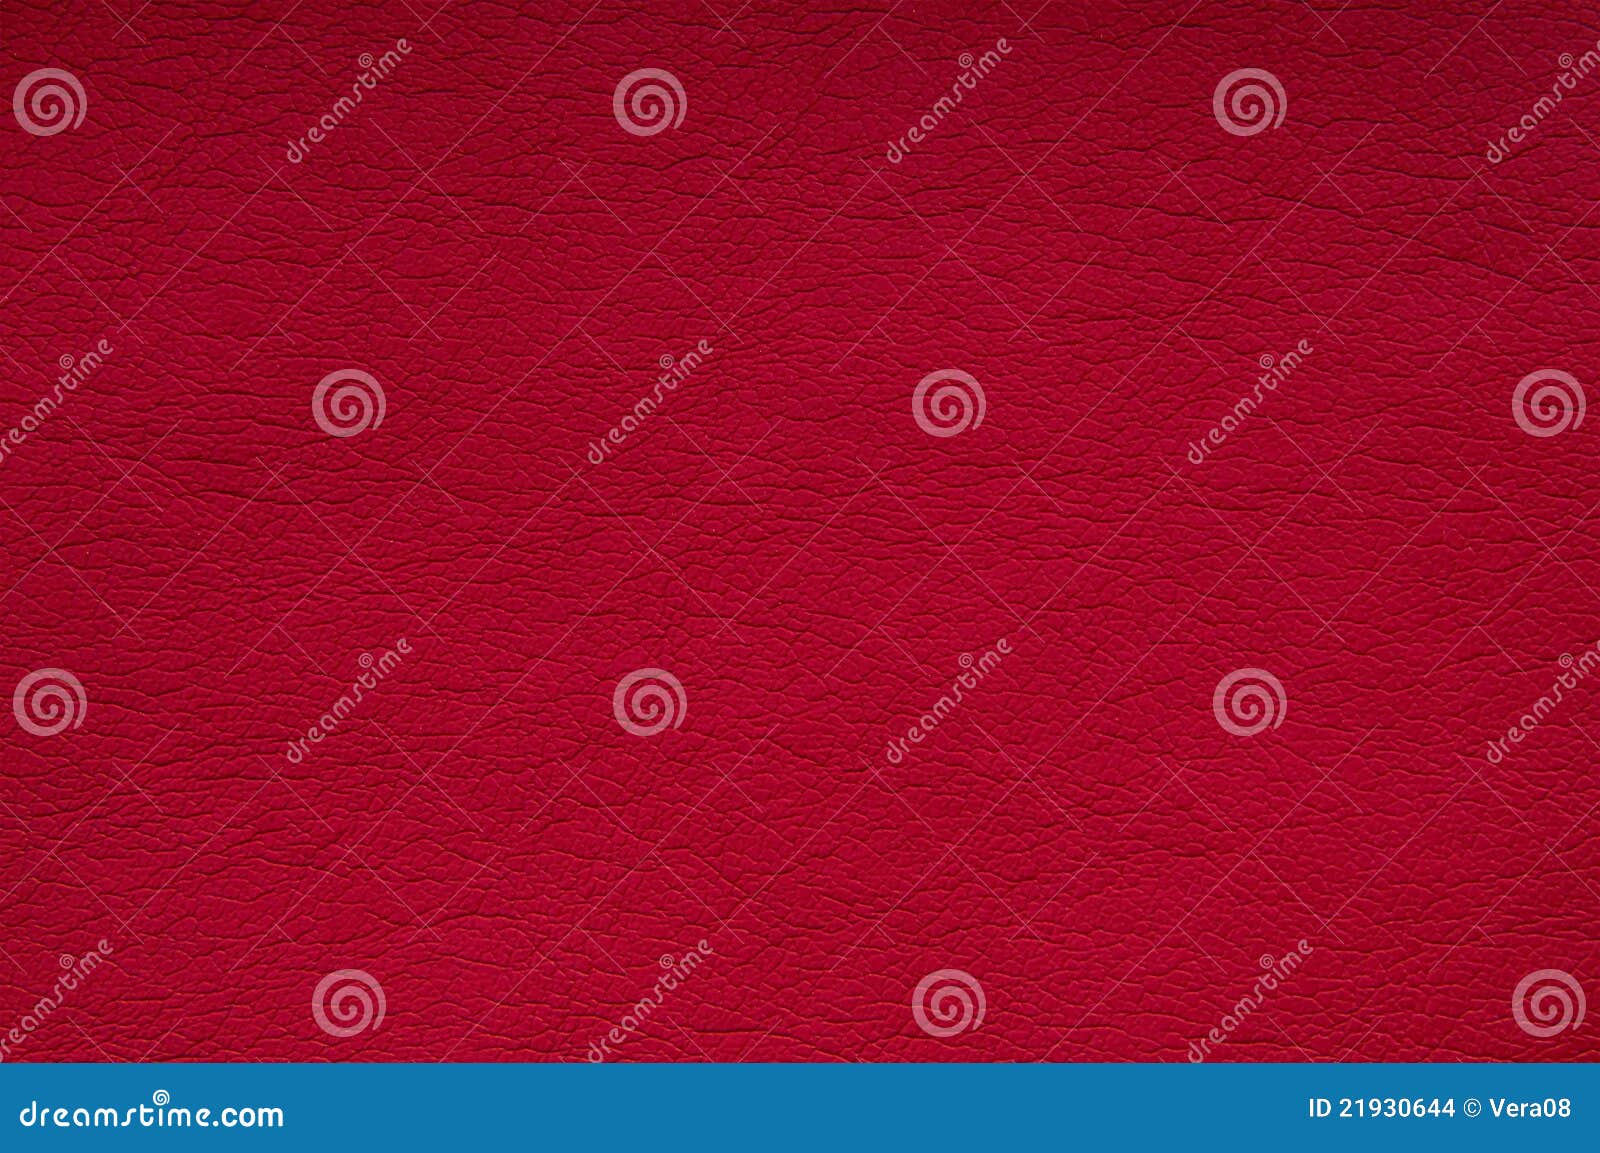 Red leather background stock photo. Image of copyspace - 21930644